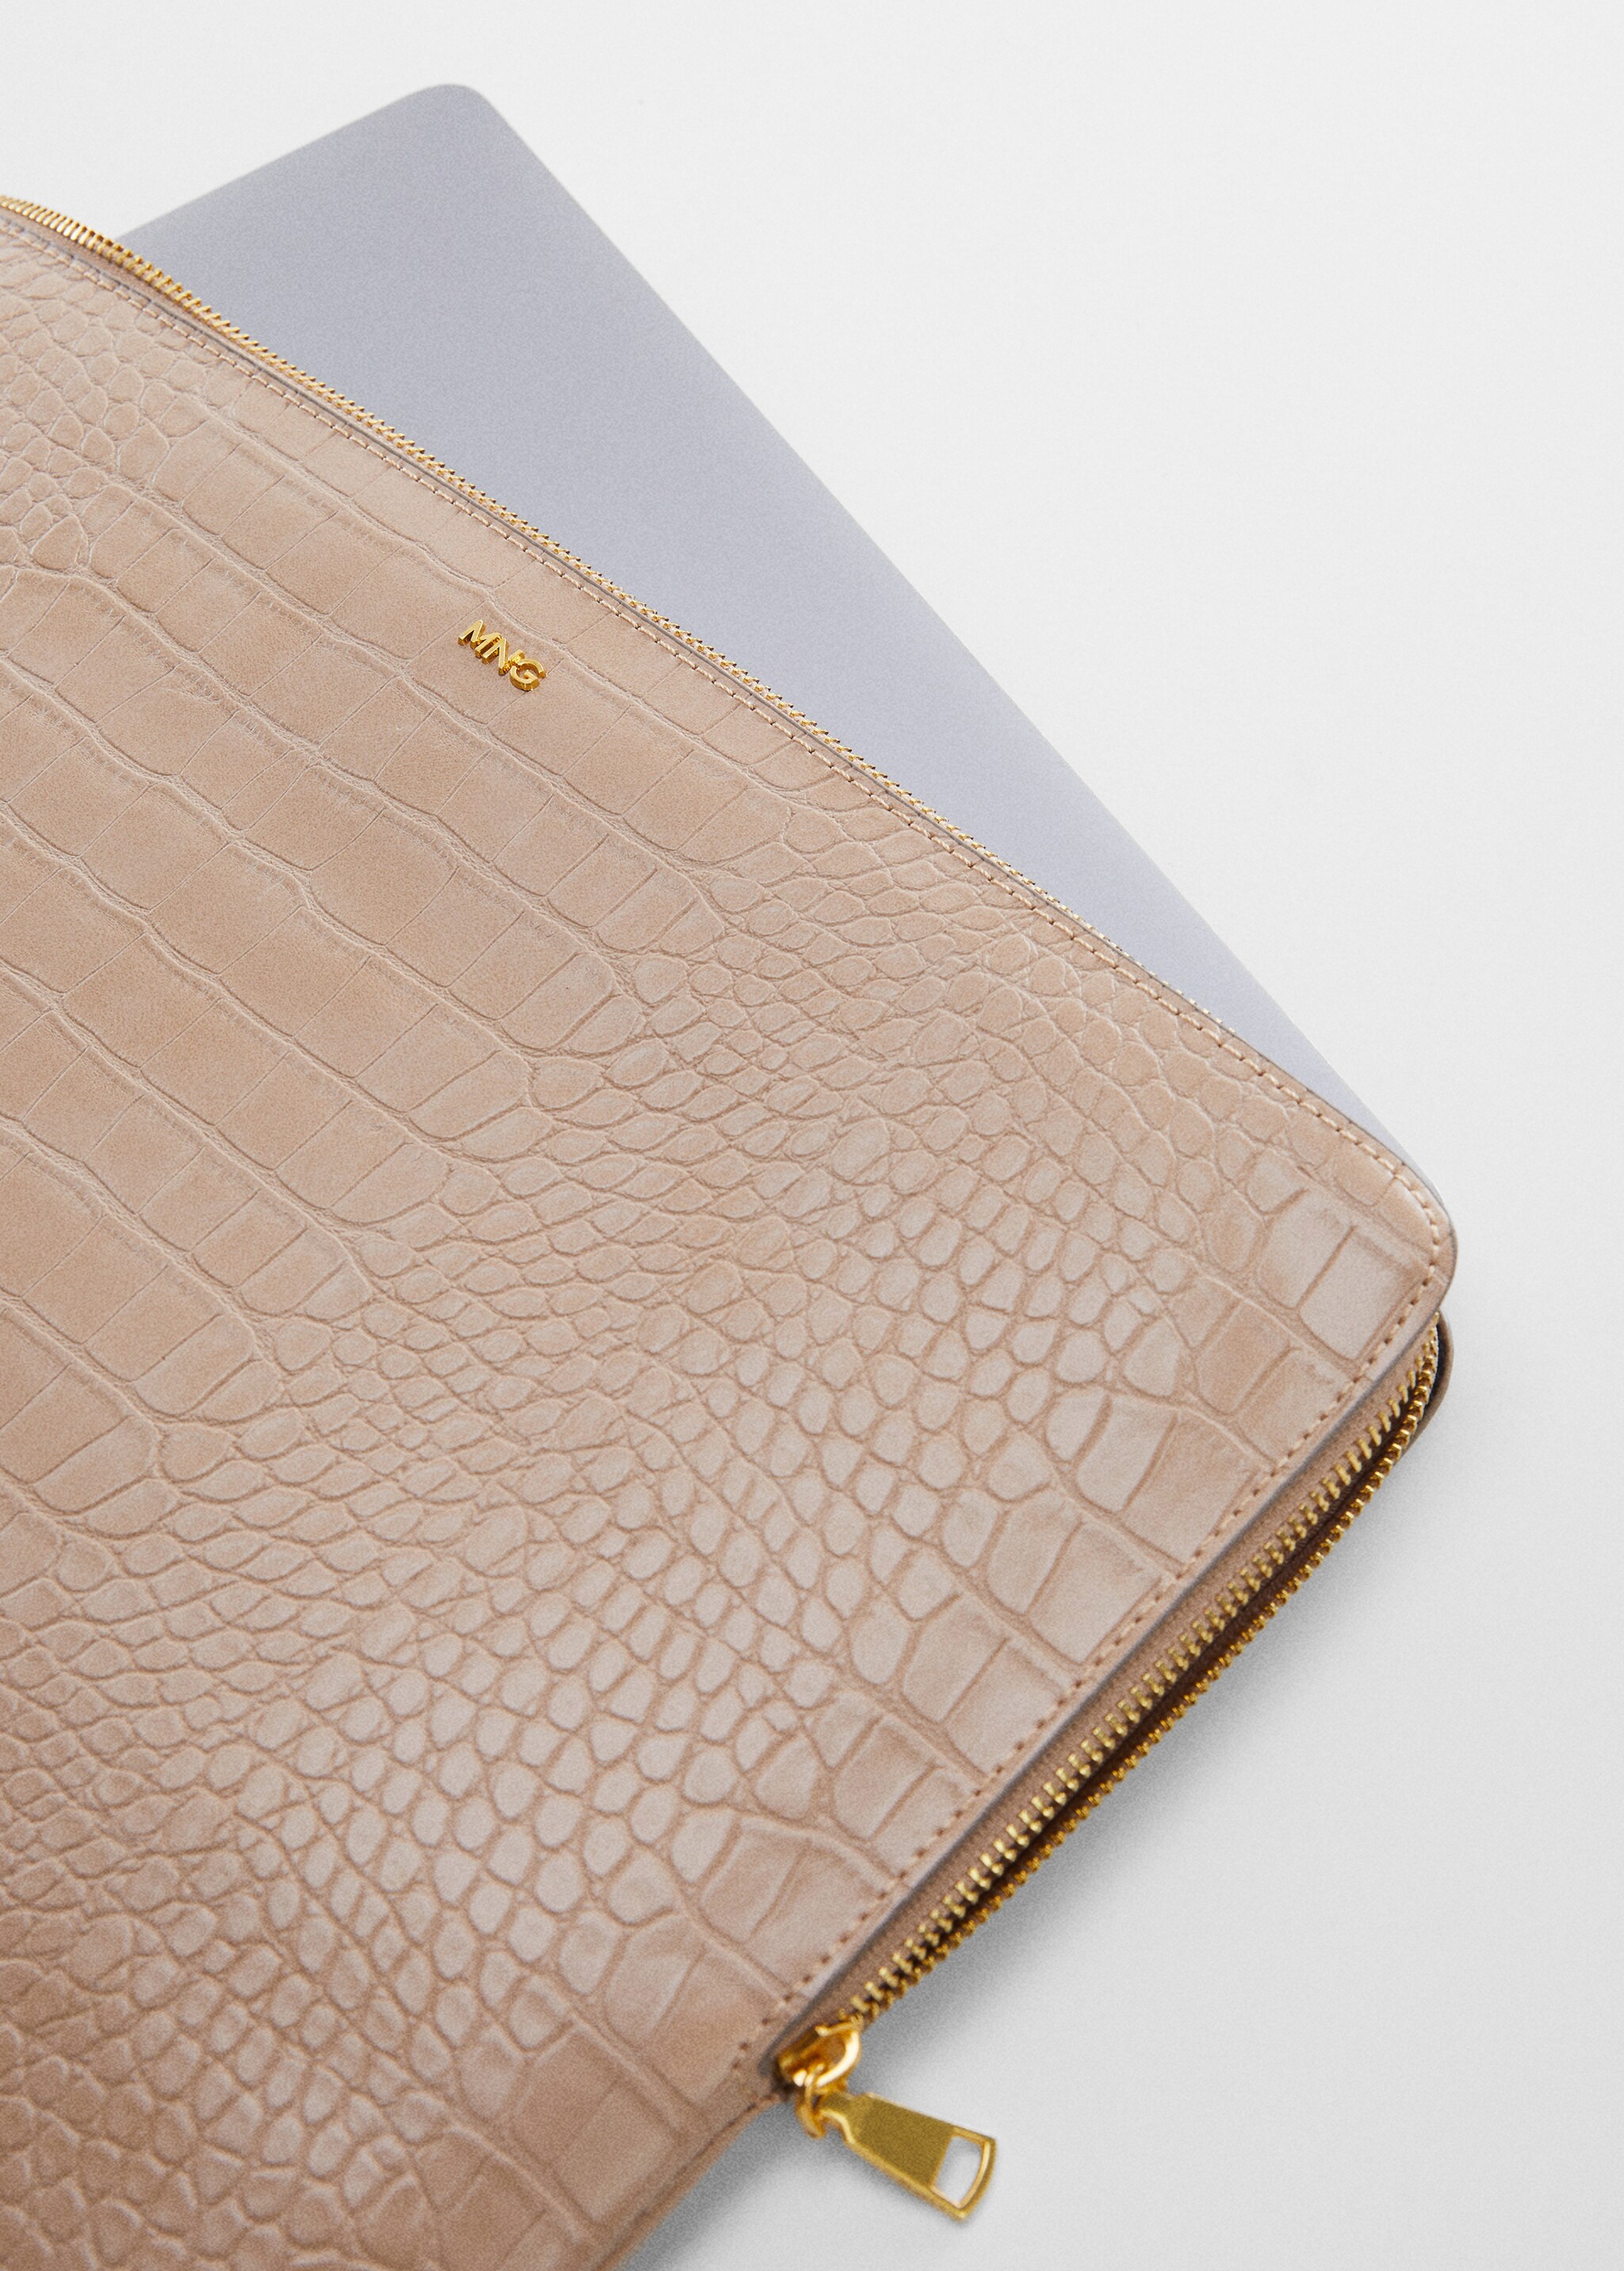 Animal print laptop case - Details of the article 1